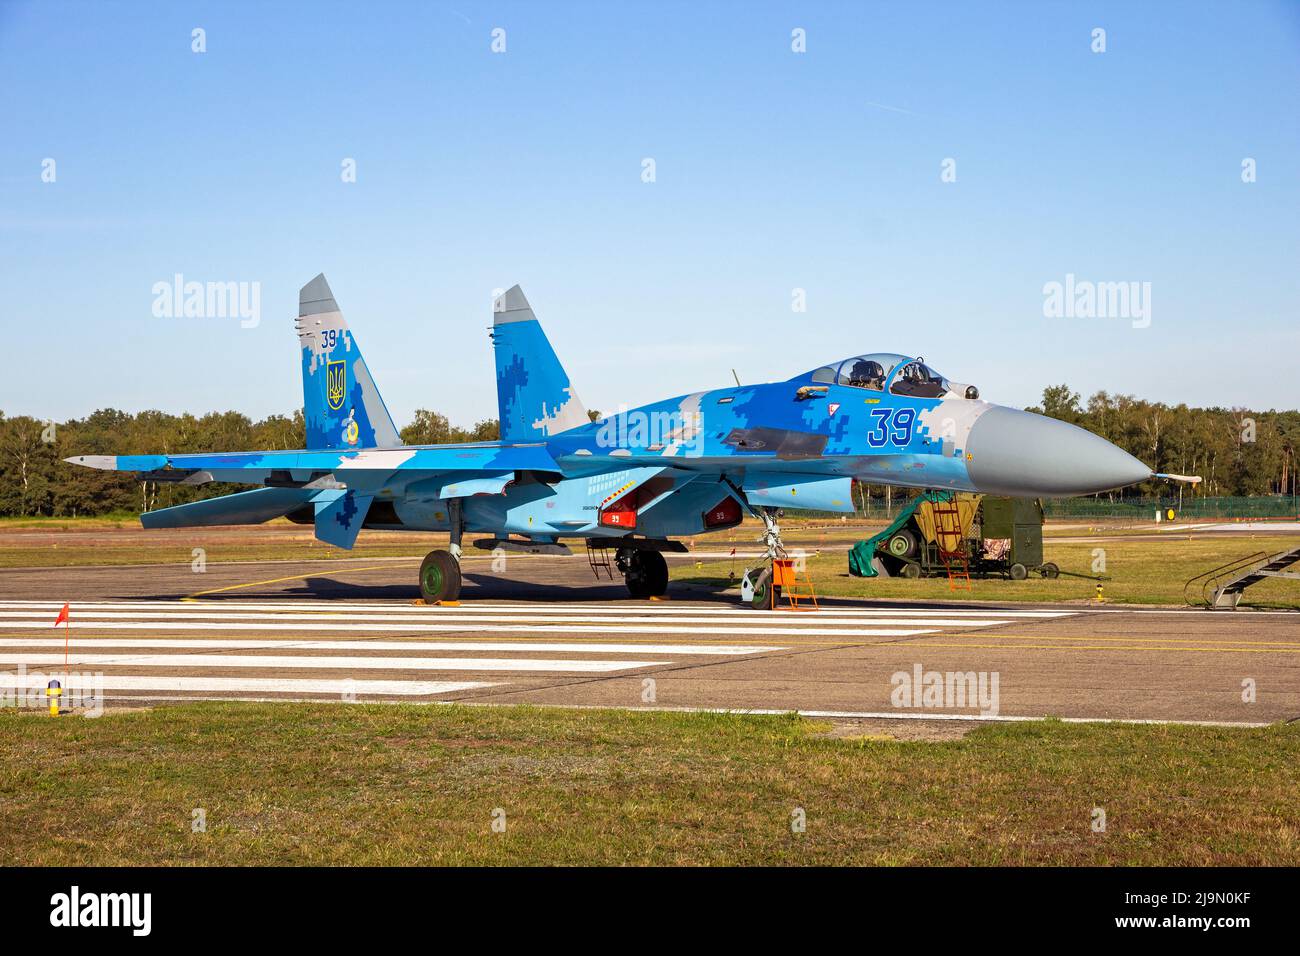 Ukrainian Air Force Sukhoi Su-27 Flanker fighter aircraft on the tarmac of Kleine-Brogel Airbase. Belgium - September 14, 2019. Stock Photo